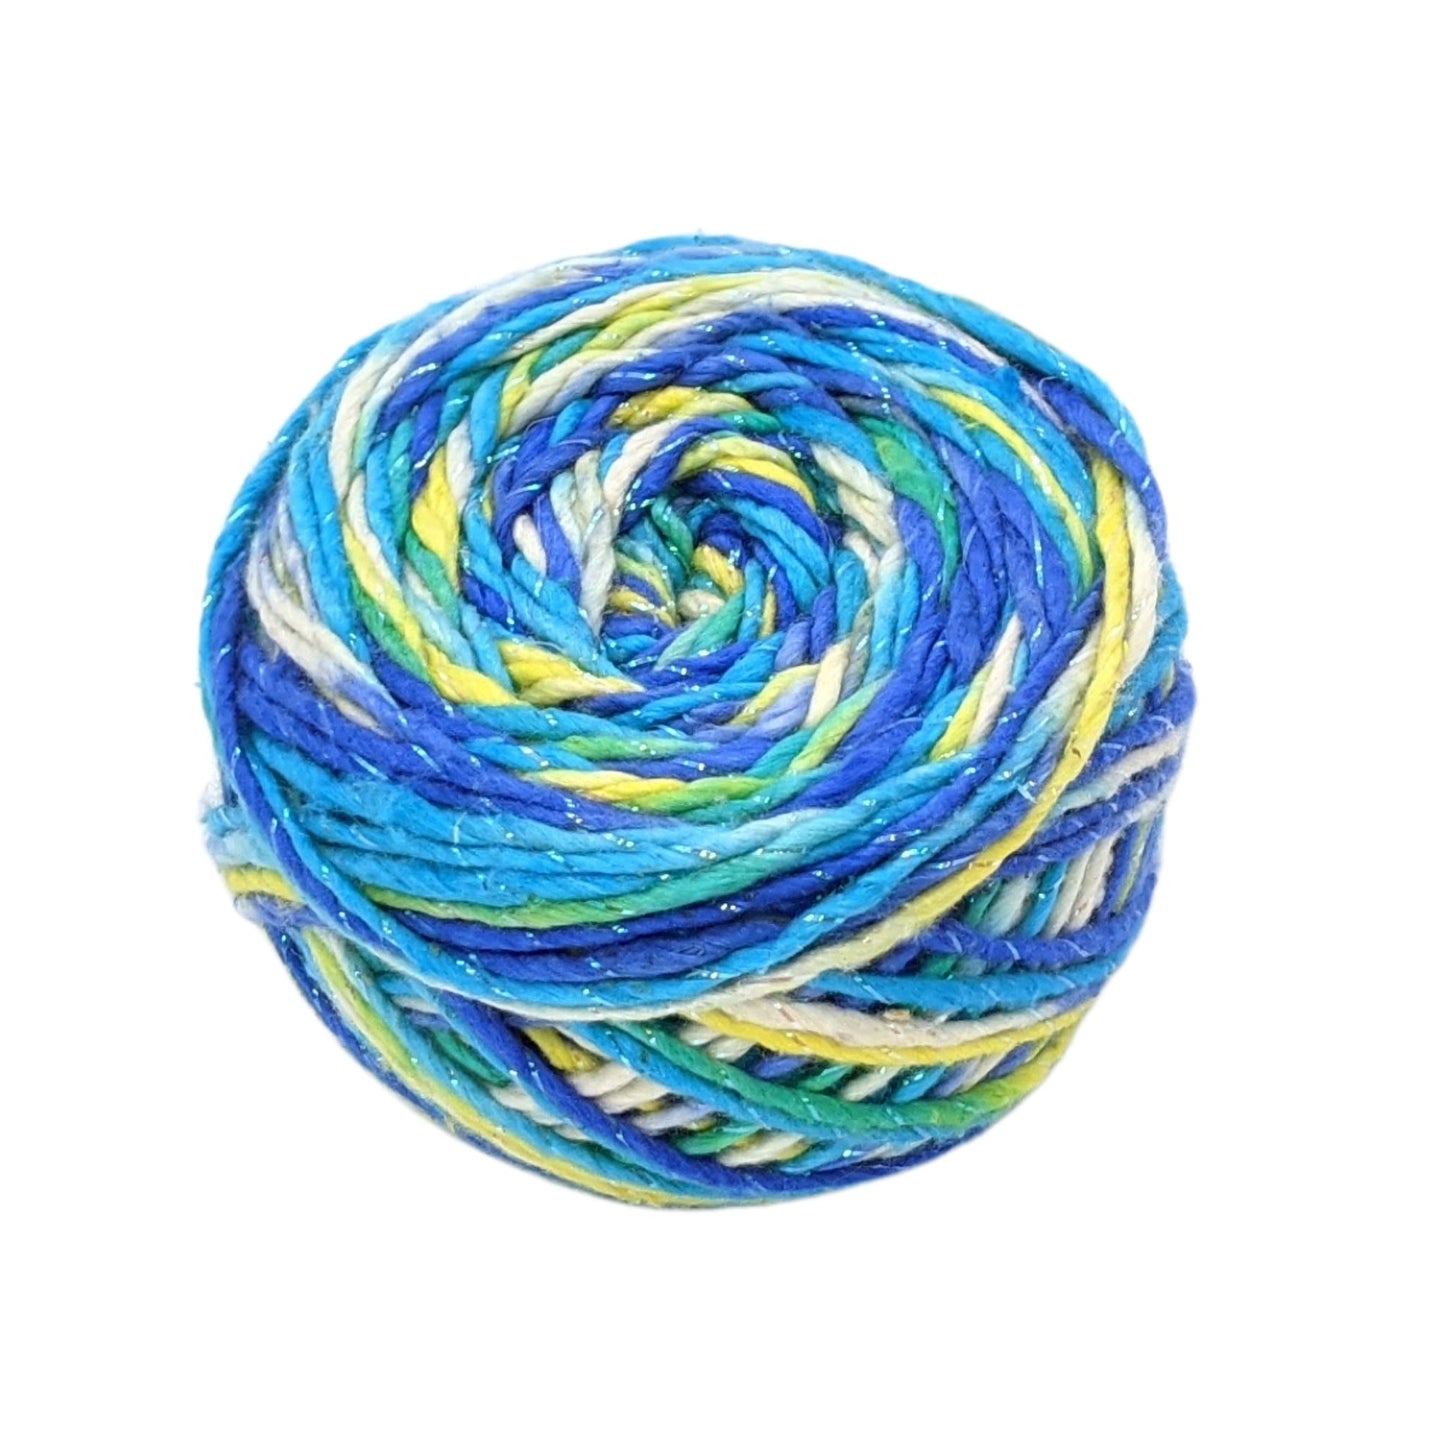 Single skien of worsted weight recycled silk yarn in Stars in the Night Sky light (yellow, green, blue, white variegated) color way in front of a white background.